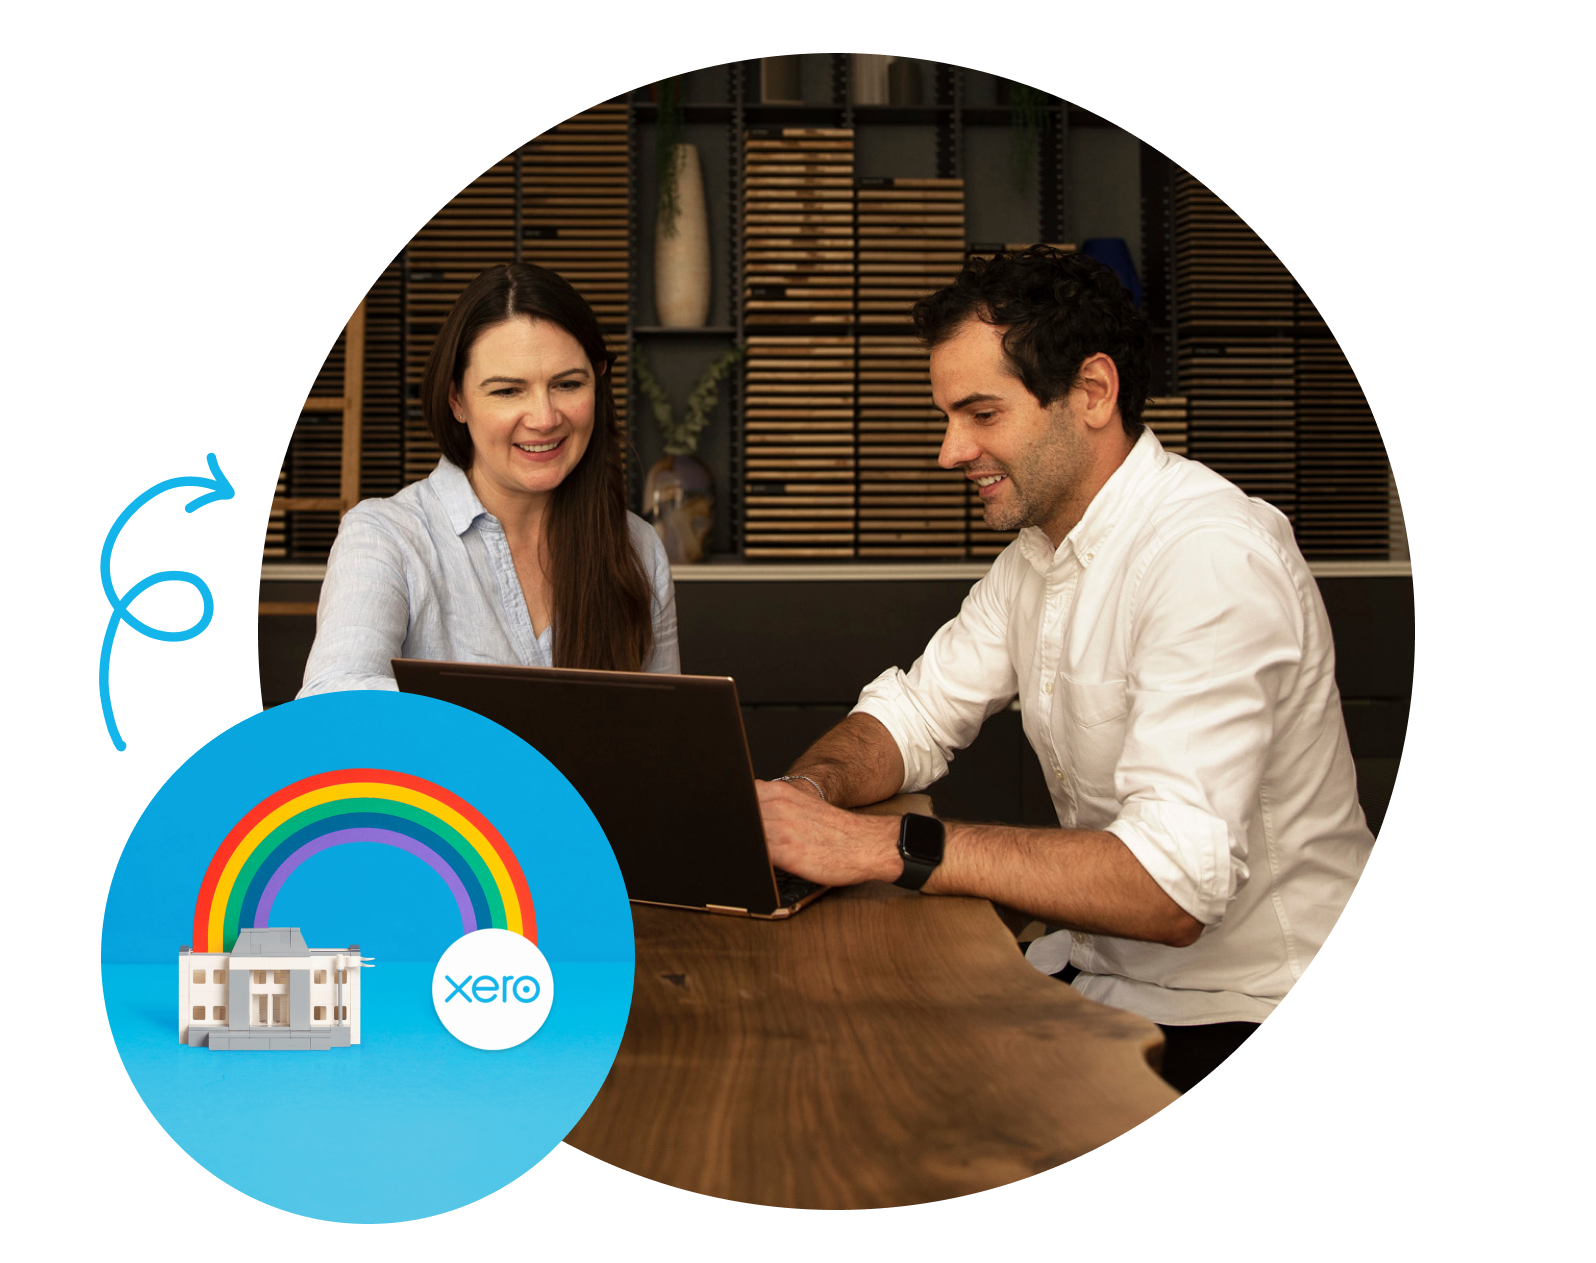 Rainbow and Xero logo on blue background. Partner working with client on laptop device.